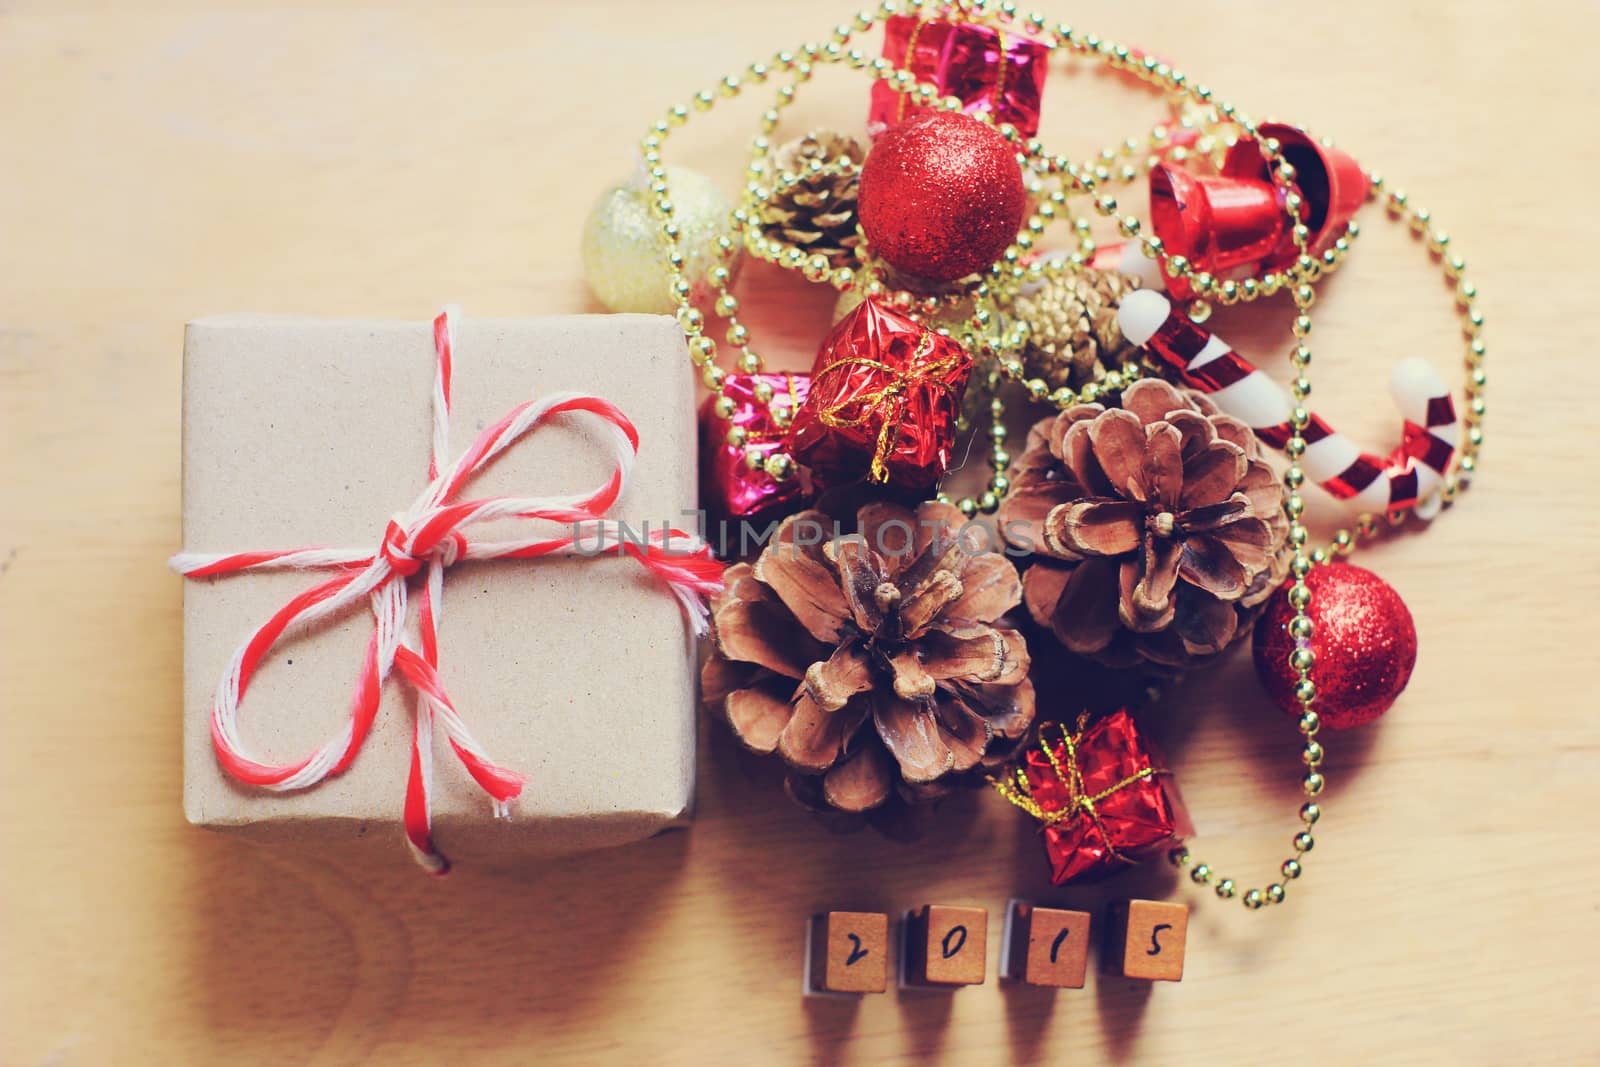 Gift box and christmas ornament with retro filter effect by nuchylee